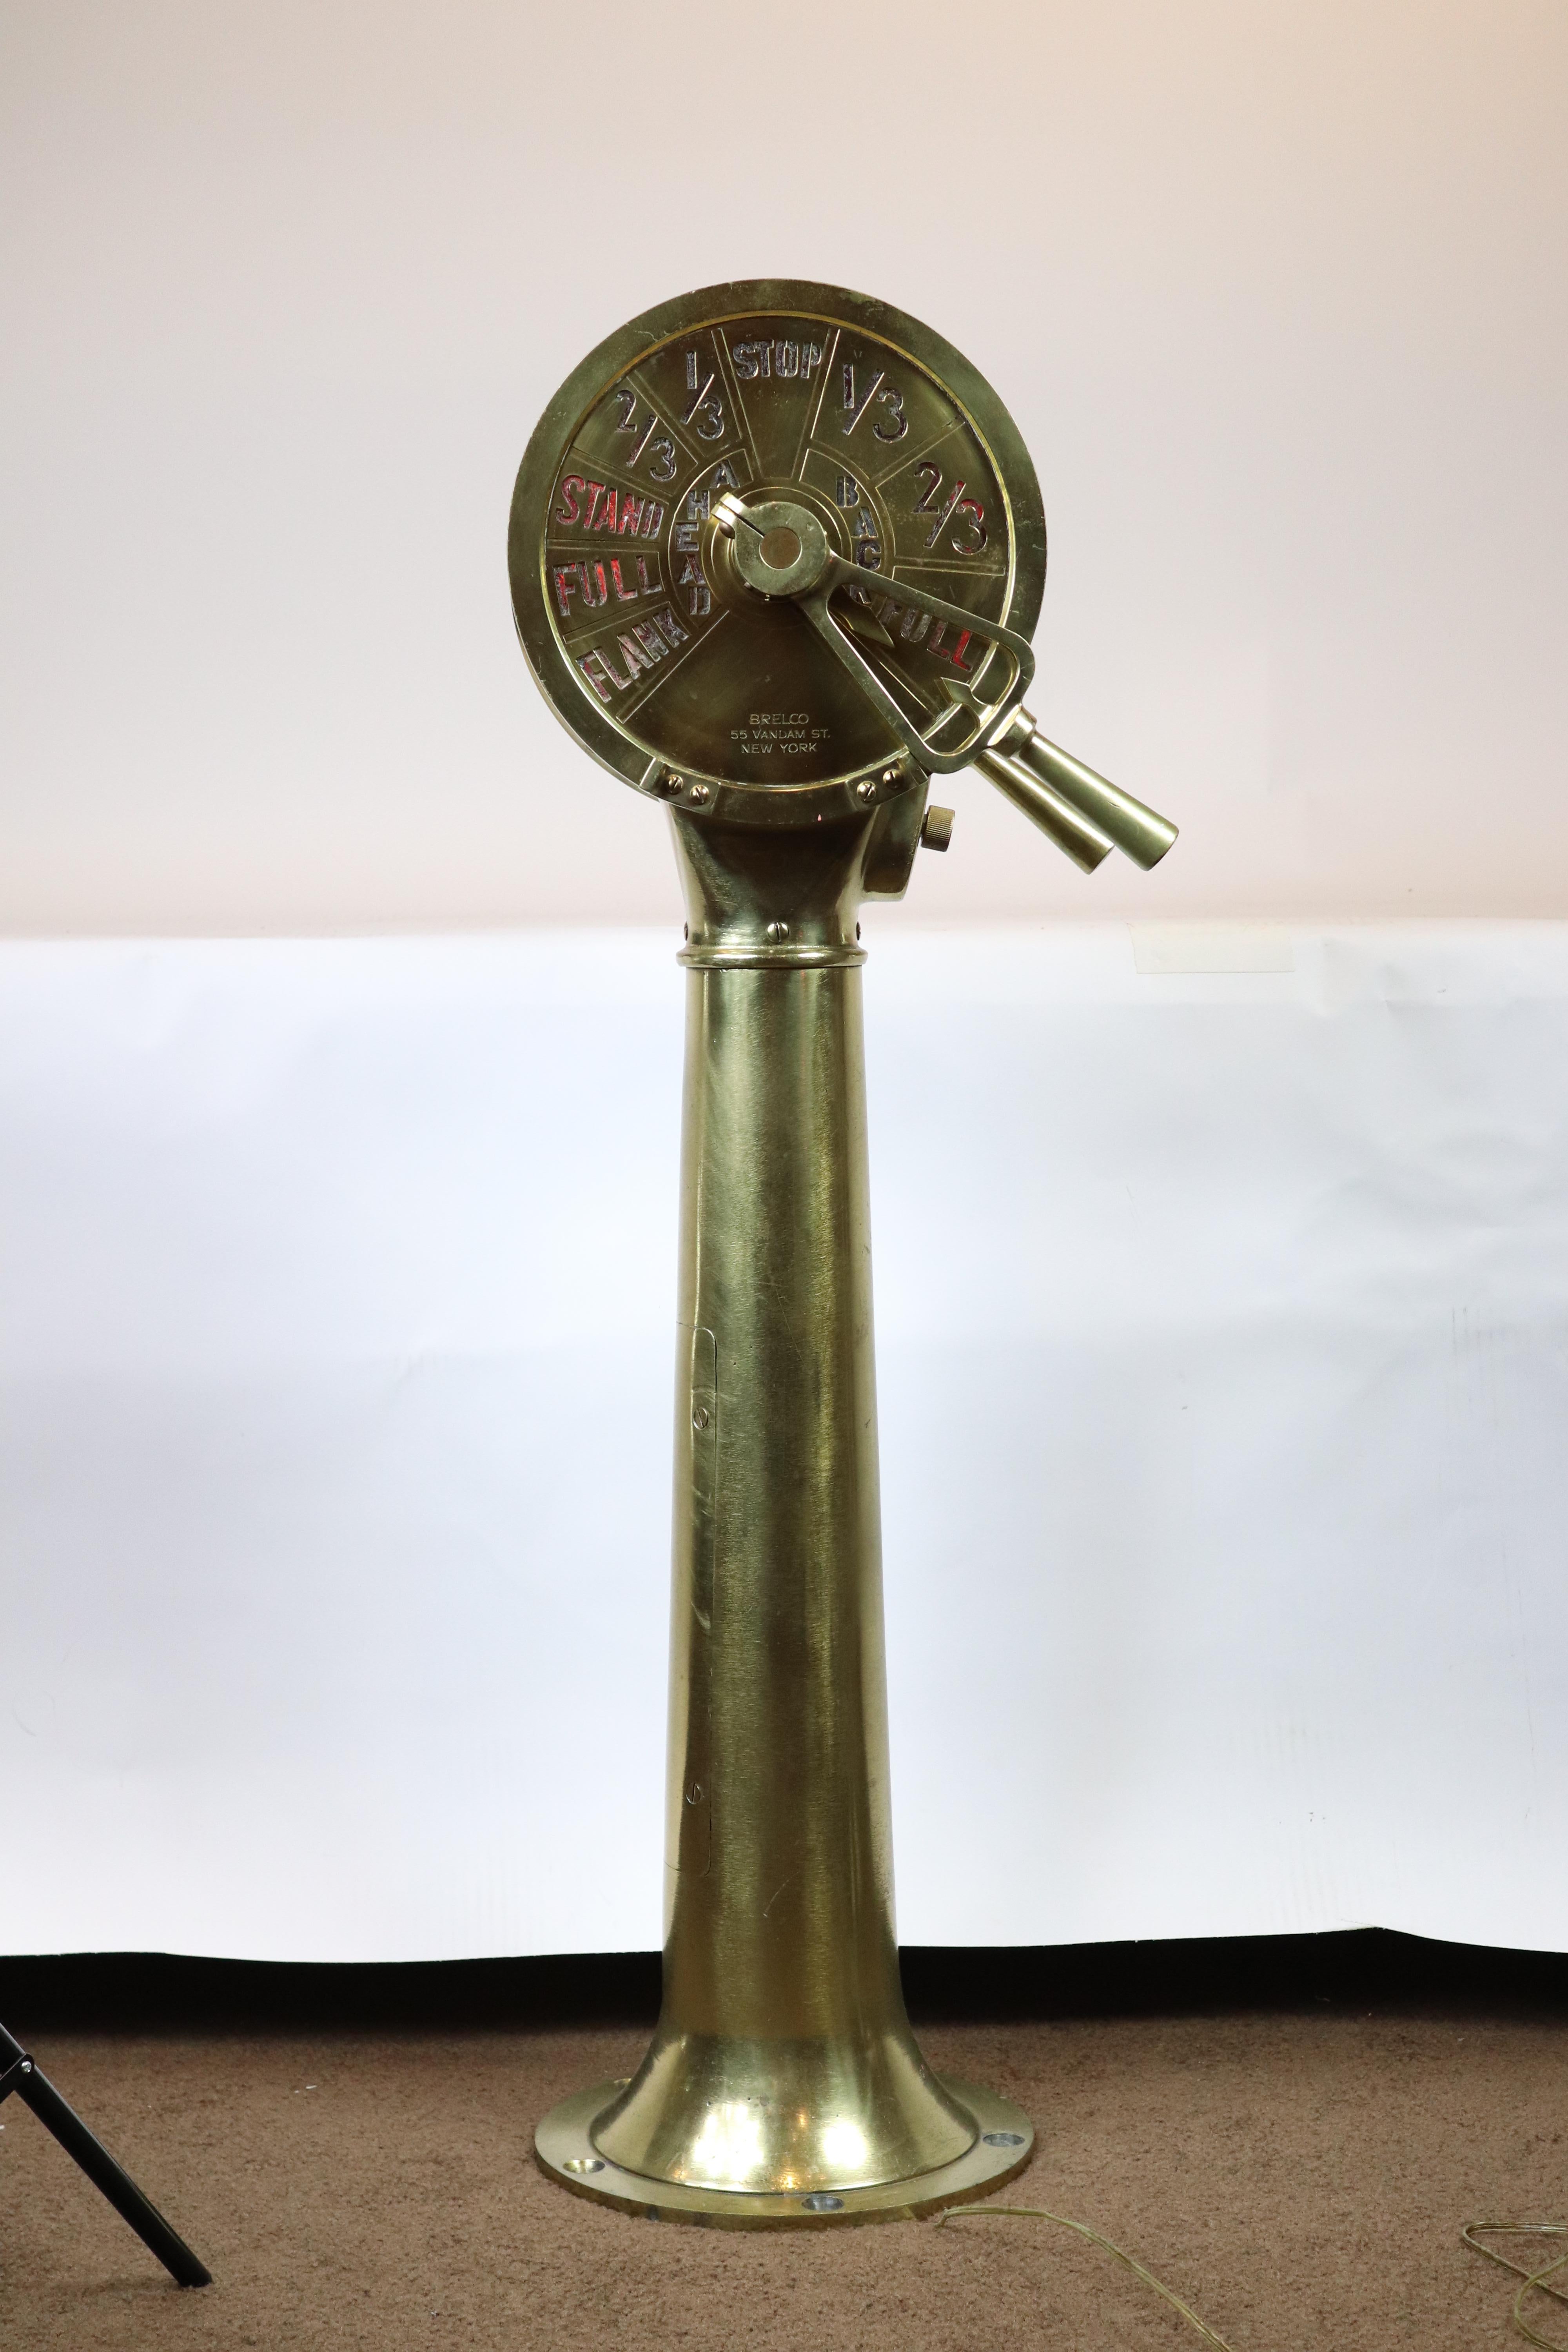 Solid brass, polished ship's telegraph by Brelco, 55 Vandam St., New York. With brass faceplates. Ships commands for 